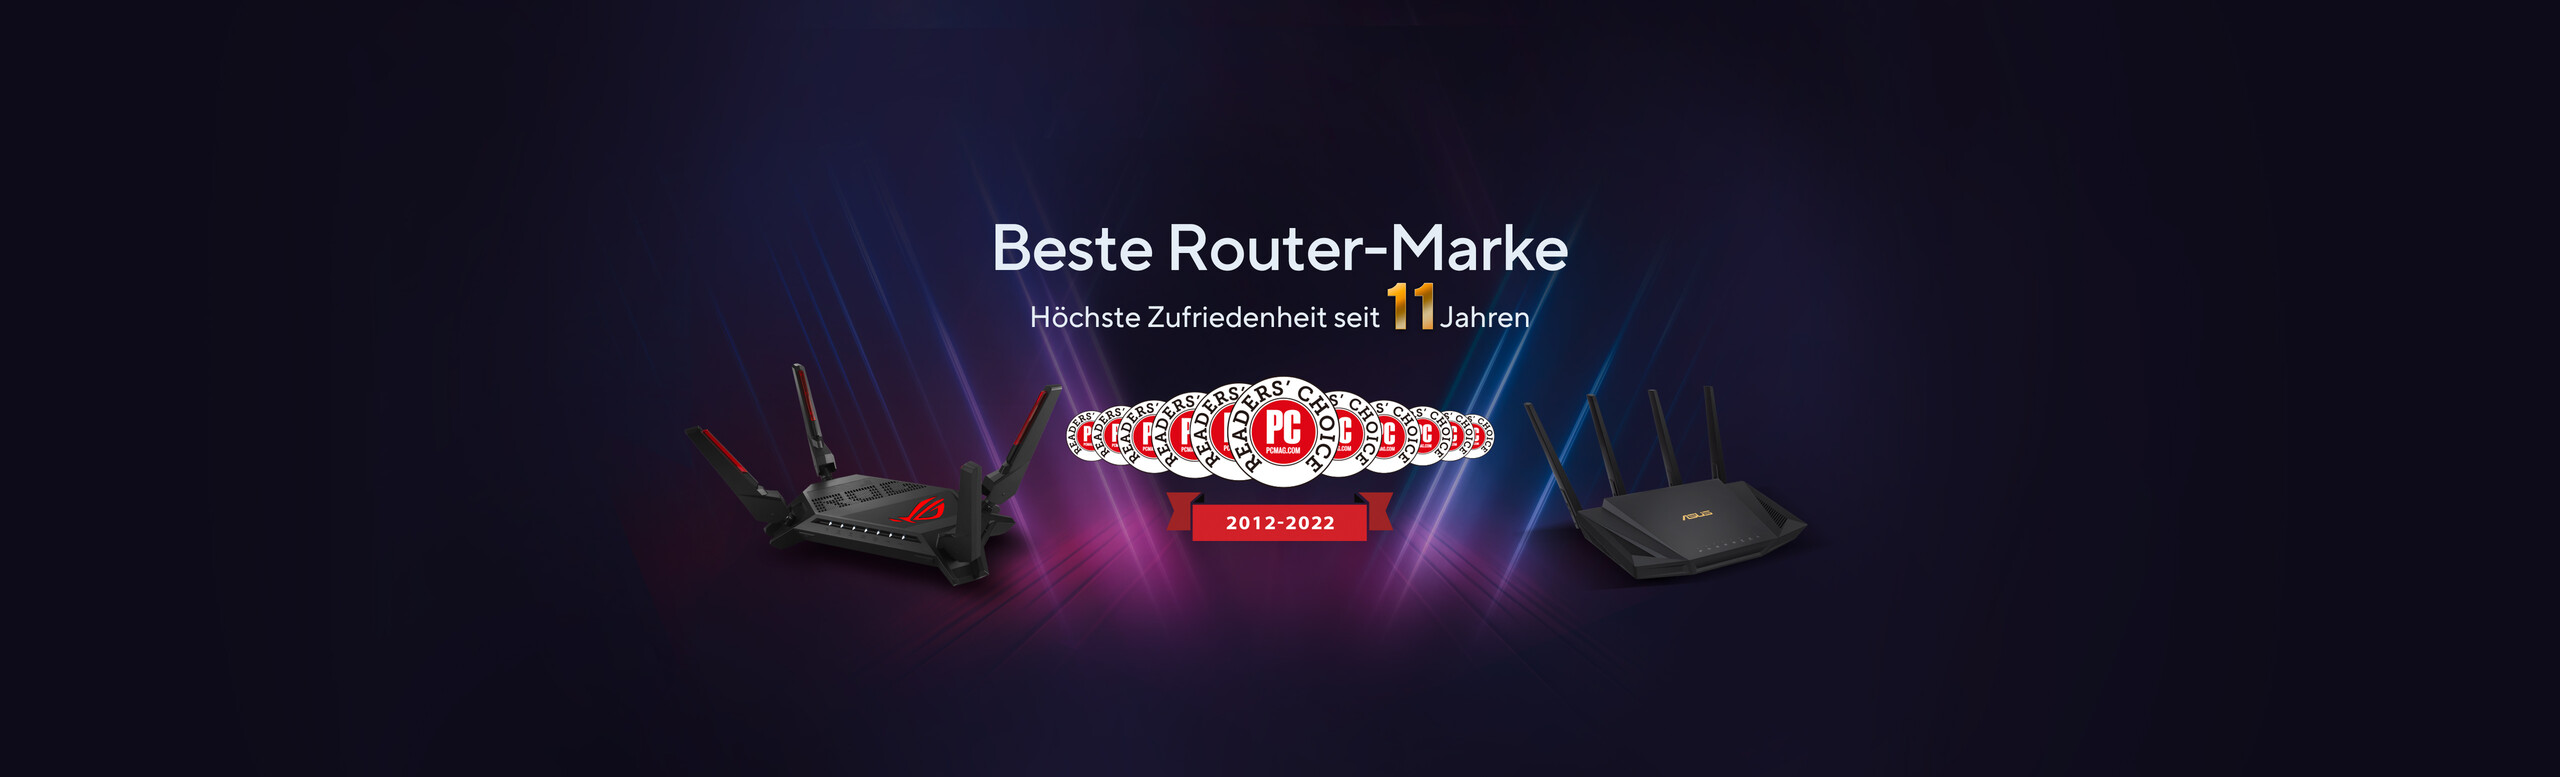 Best Router 2012-2022